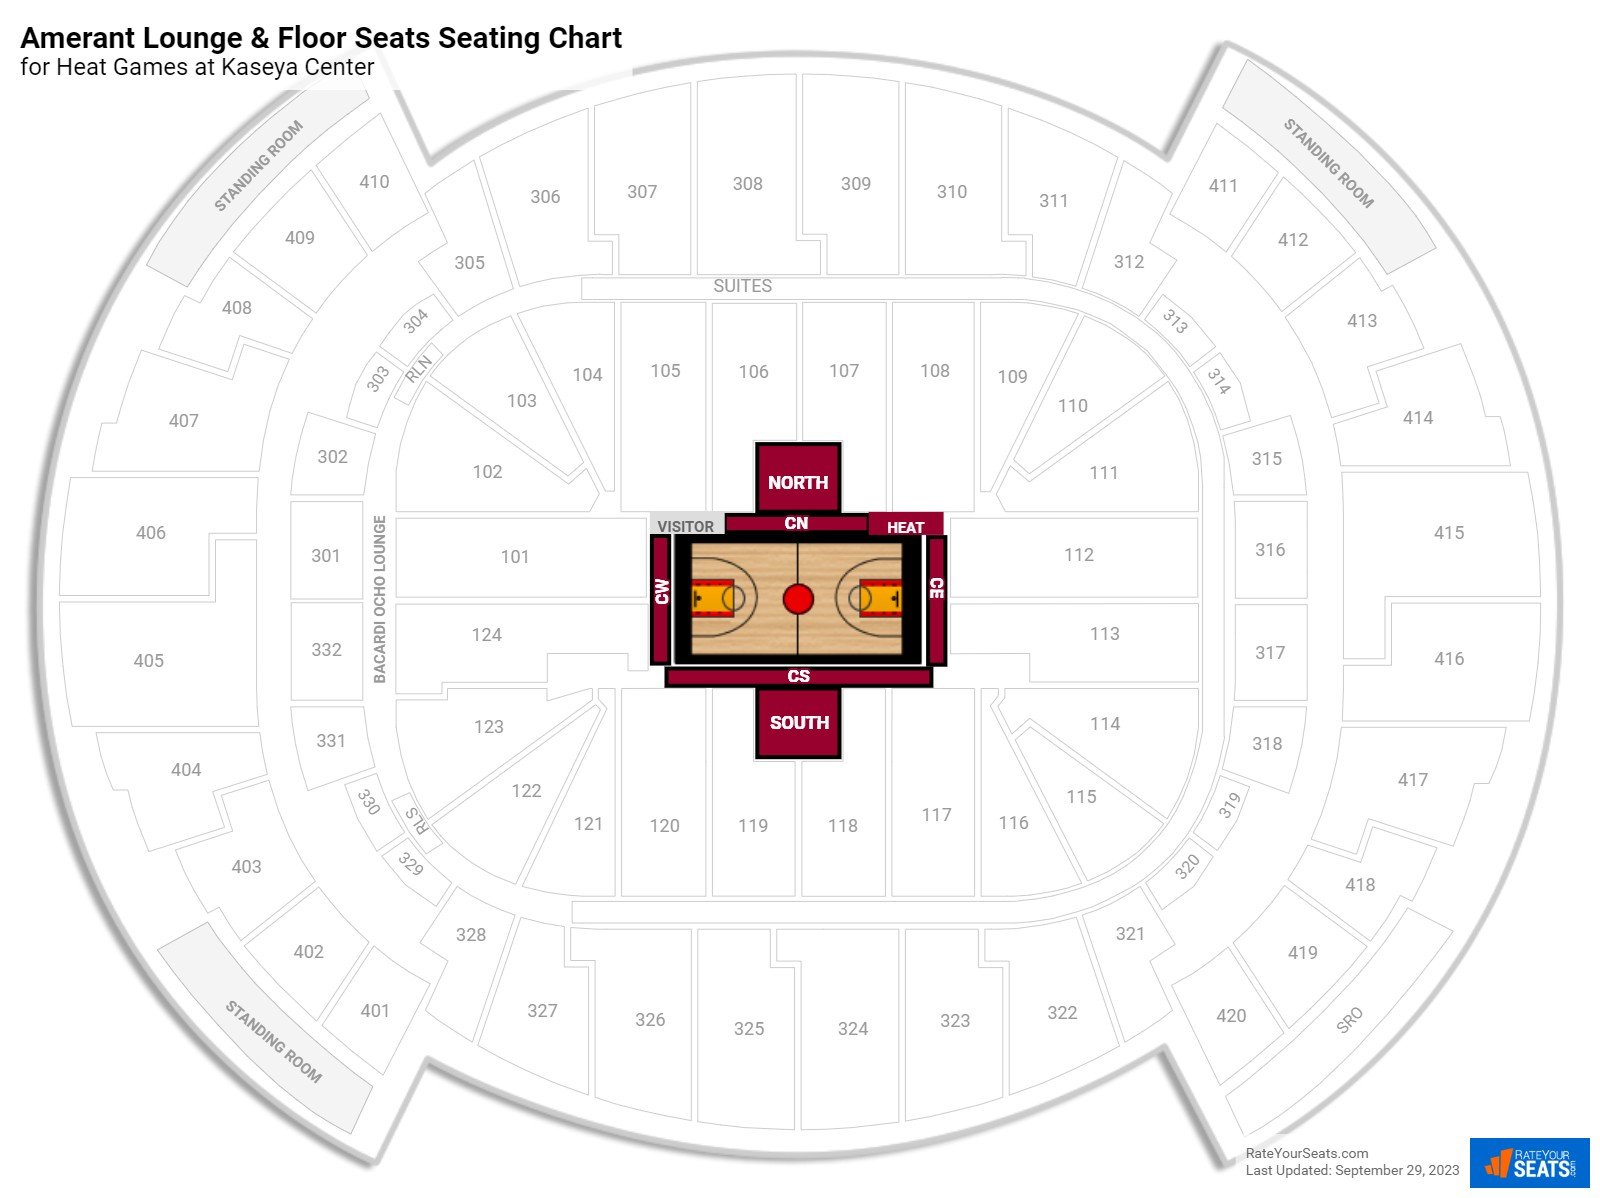 Heat AmericanAirlines Lounge & Floor Seats Seating Chart at FTX Arena